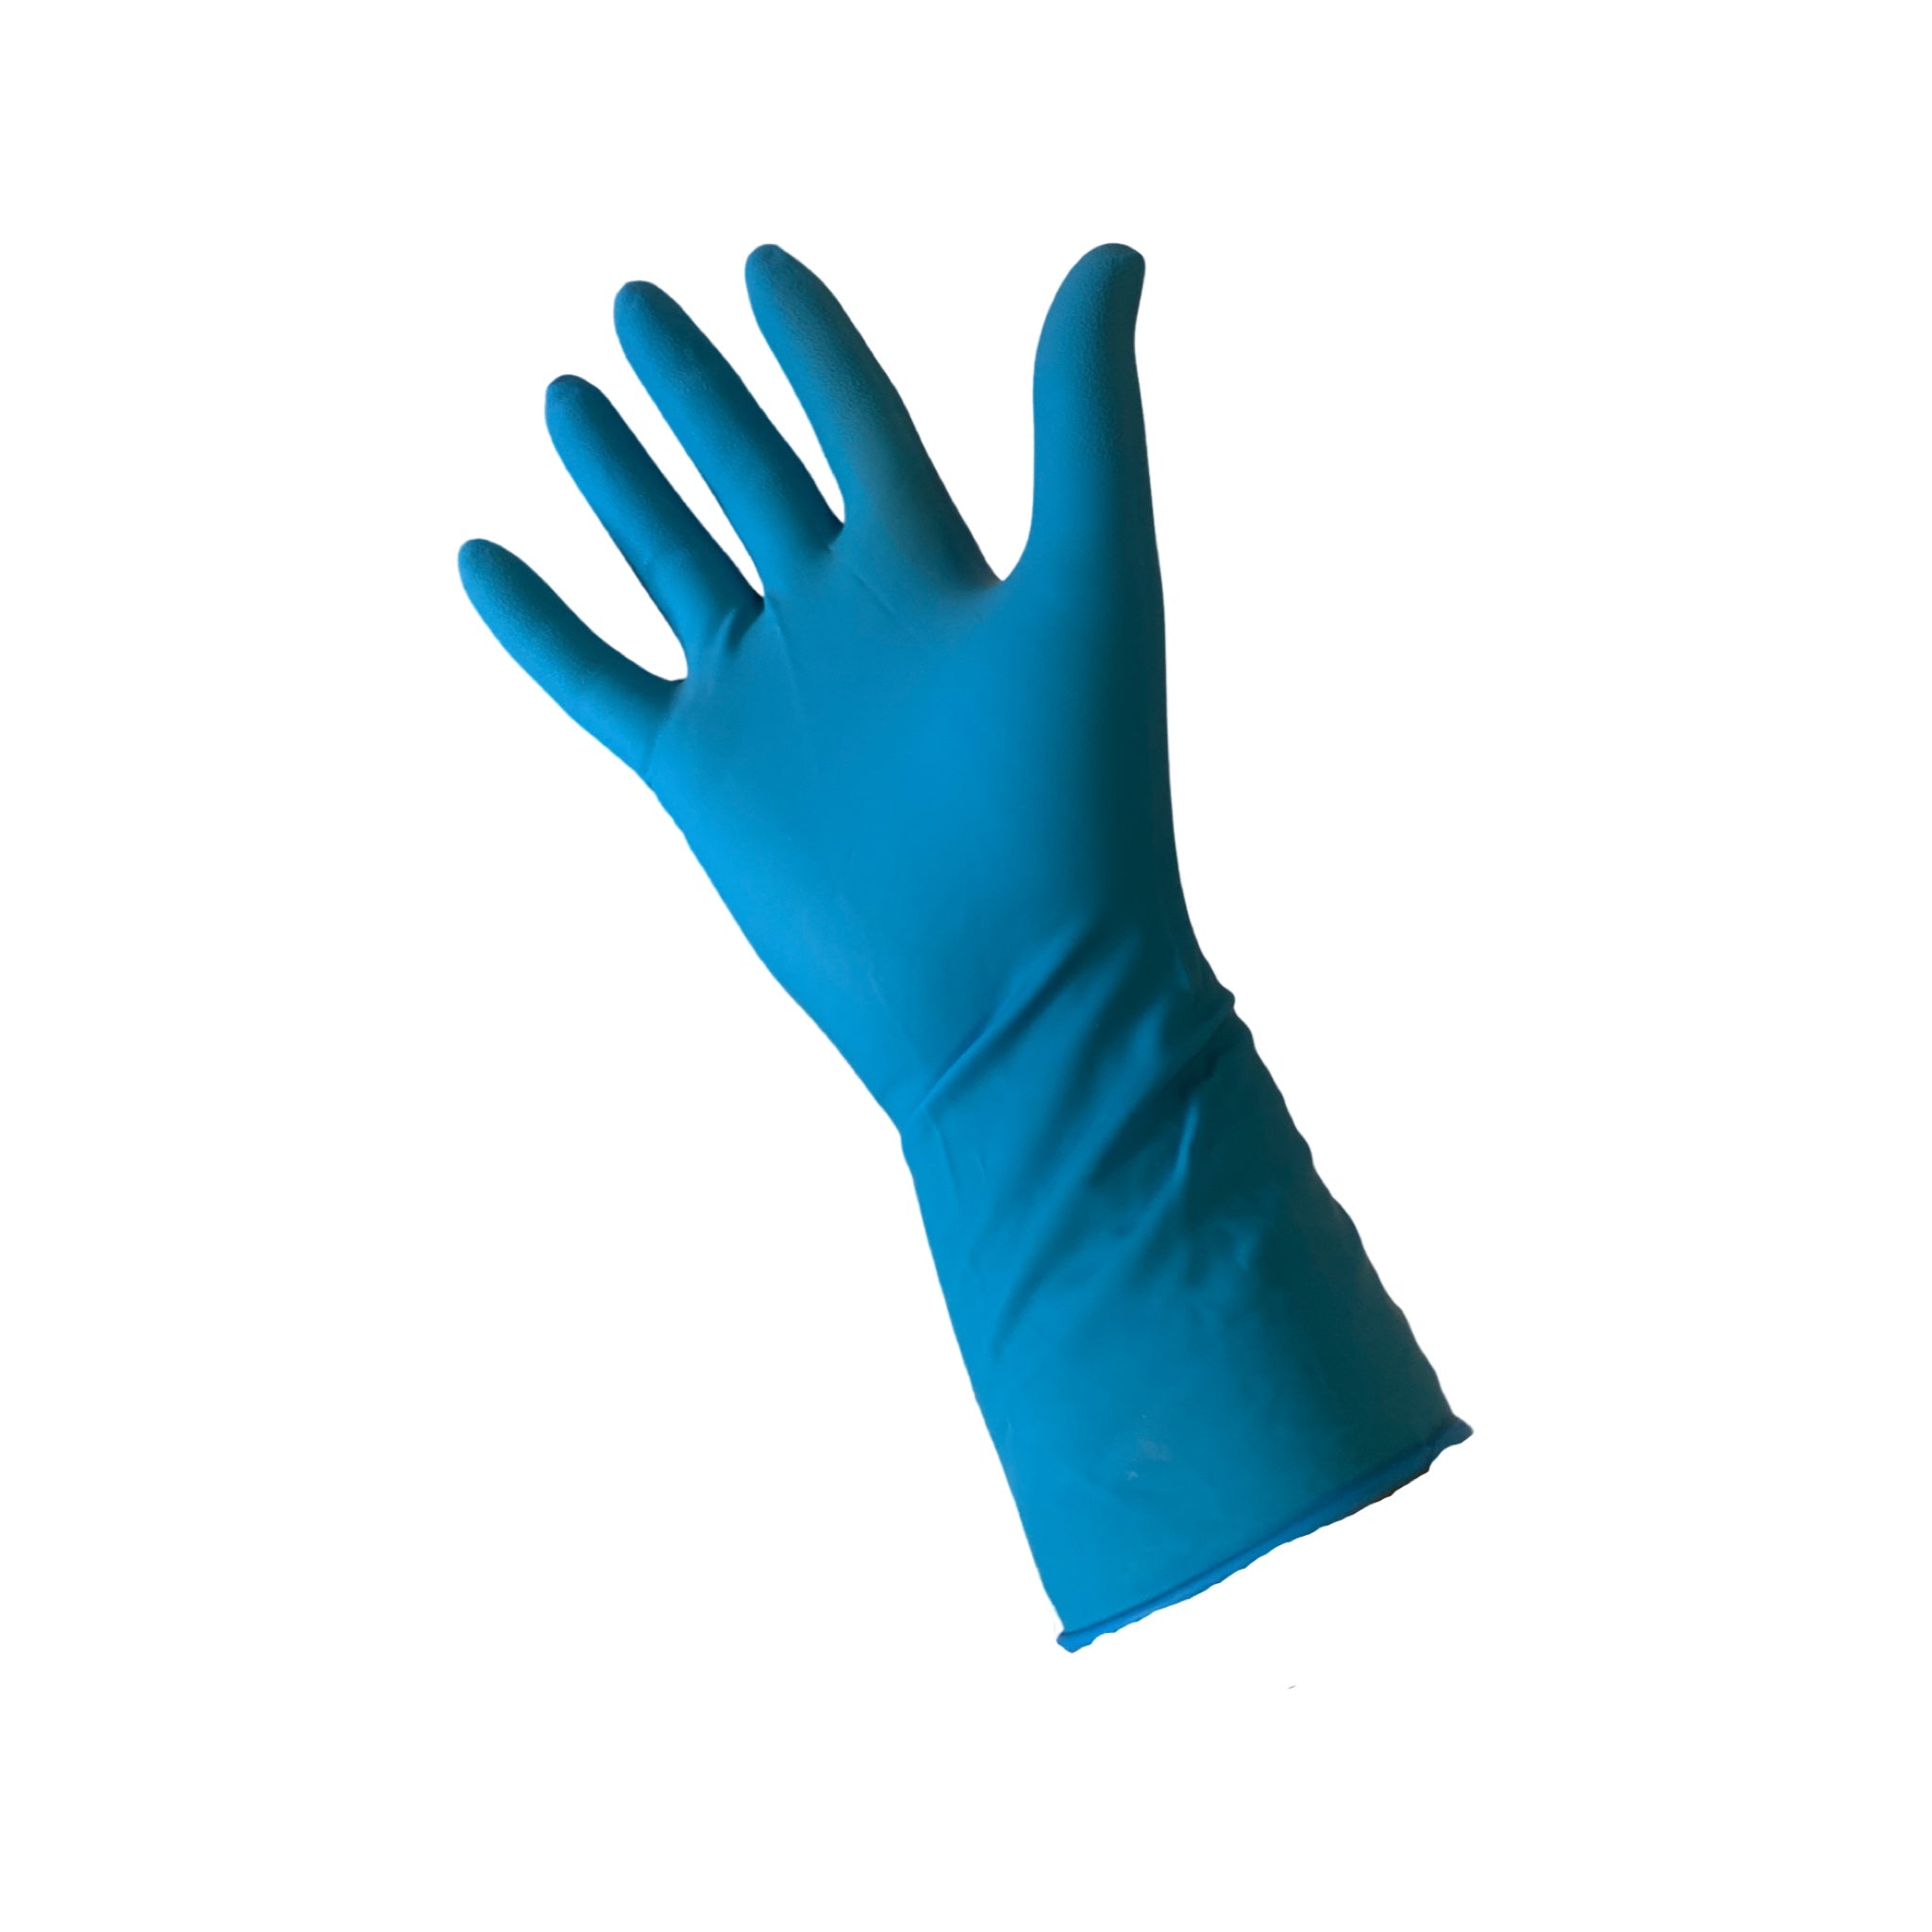 Pack of 10 Latex Gloves for versatile hand protection